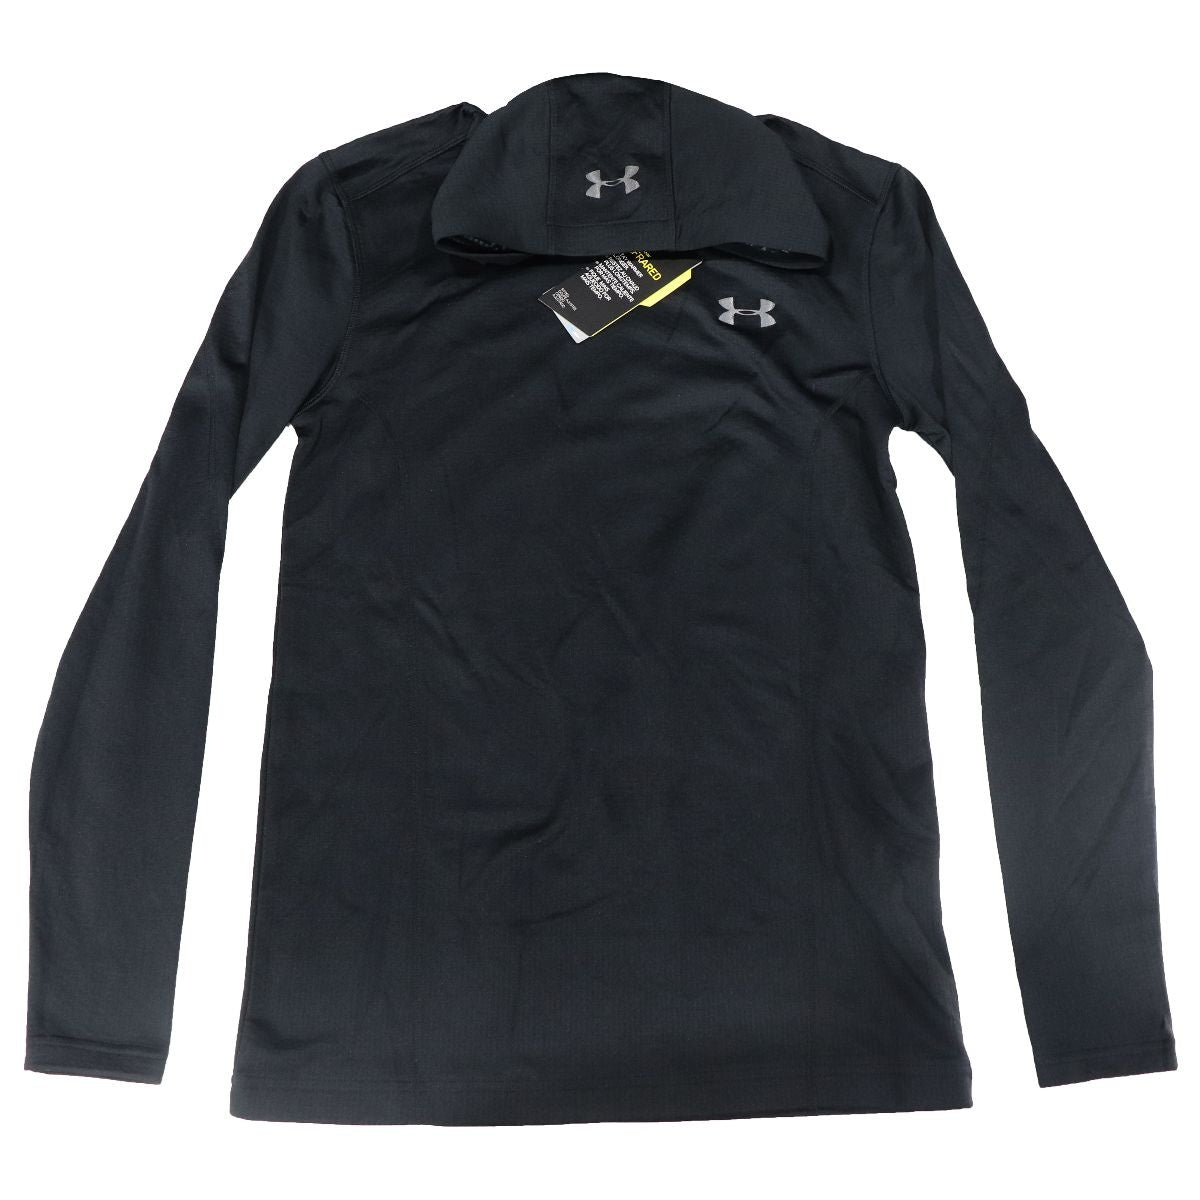 Under Armour Youth Small Long Sleeve Black Fitted Heat Gear